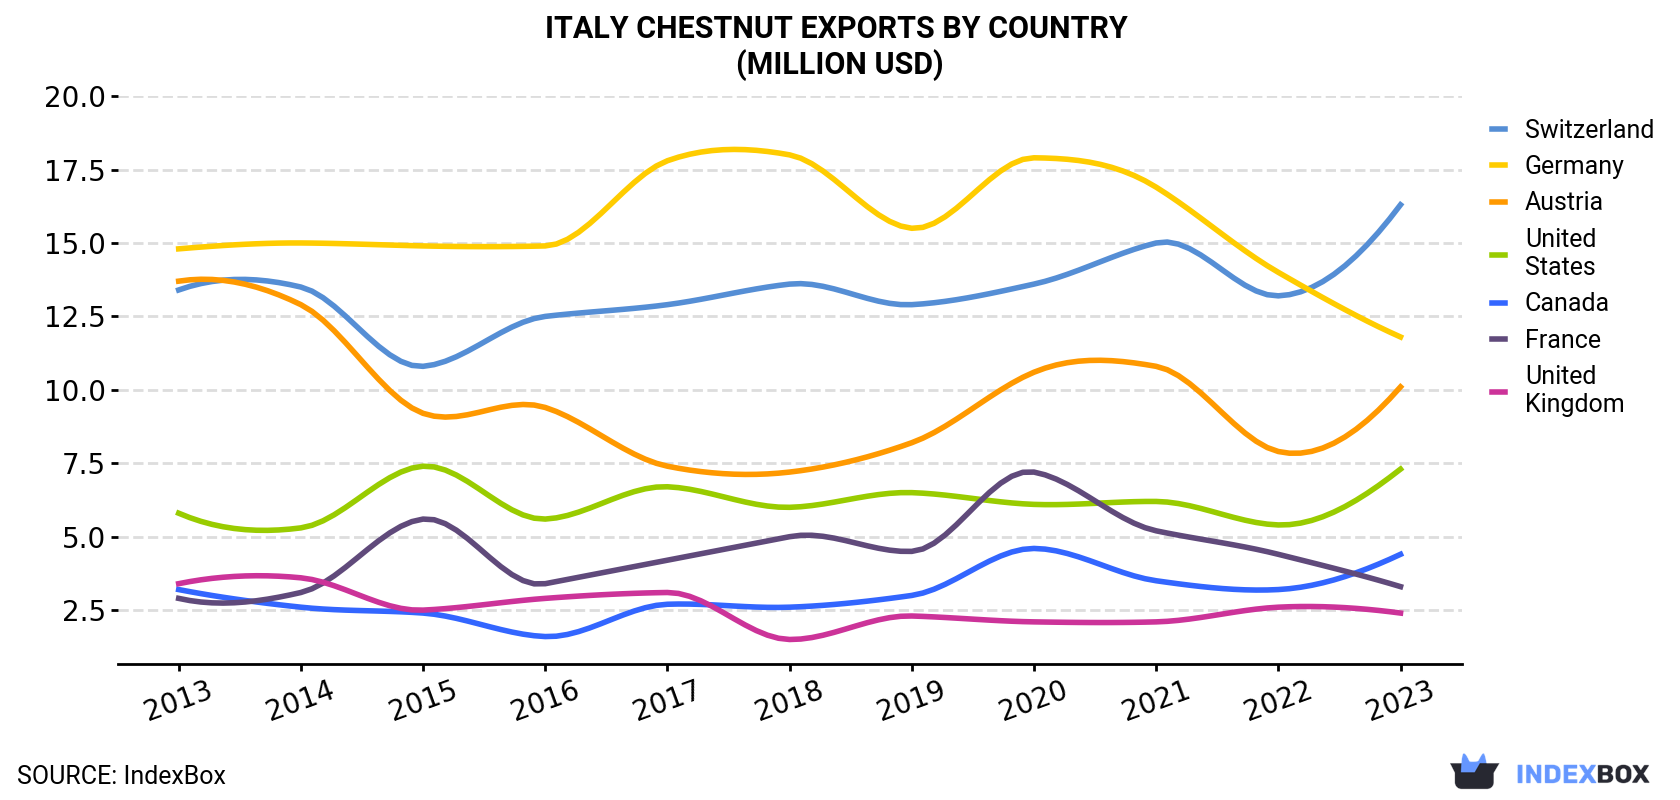 Italy Chestnut Exports By Country (Million USD)